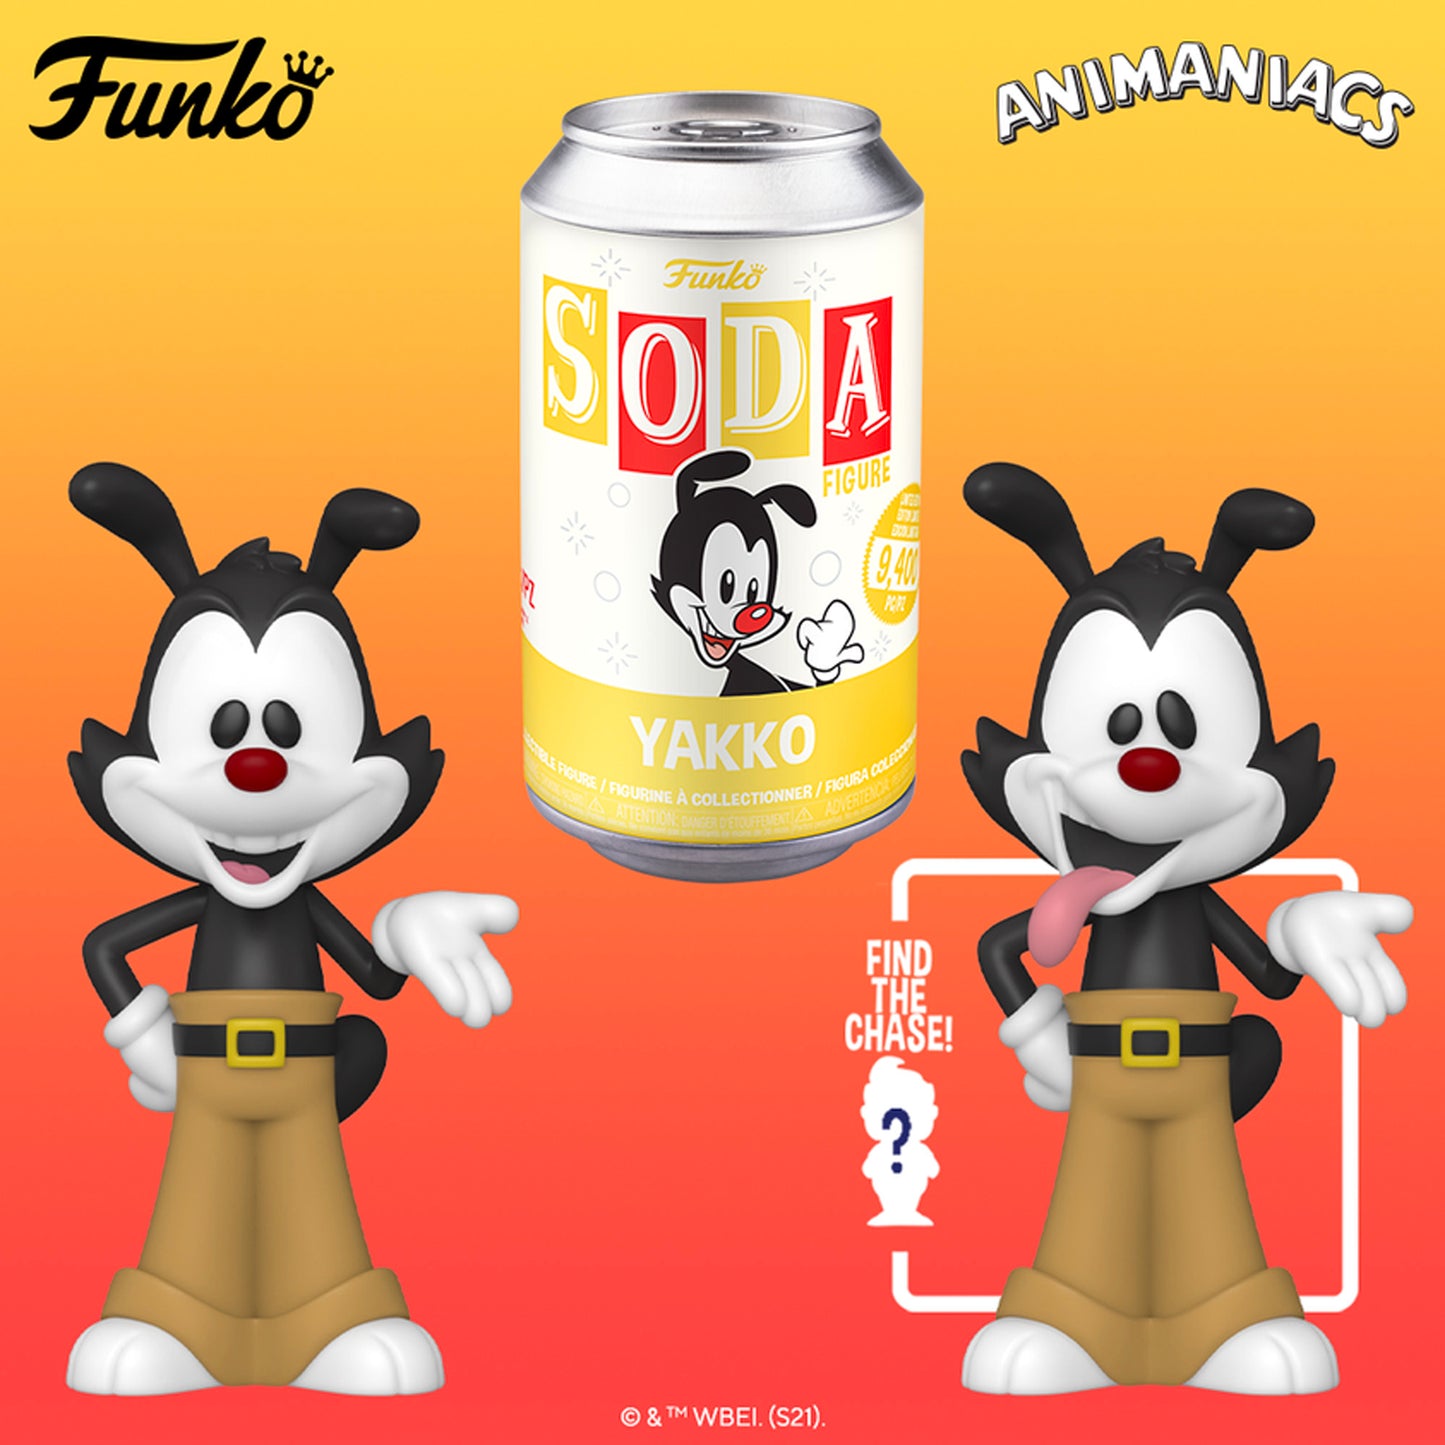 Funko Vinyl SODA: Animaniacs Yakko 9,400 Limited Edition (1 in 6 Chance at Chase)